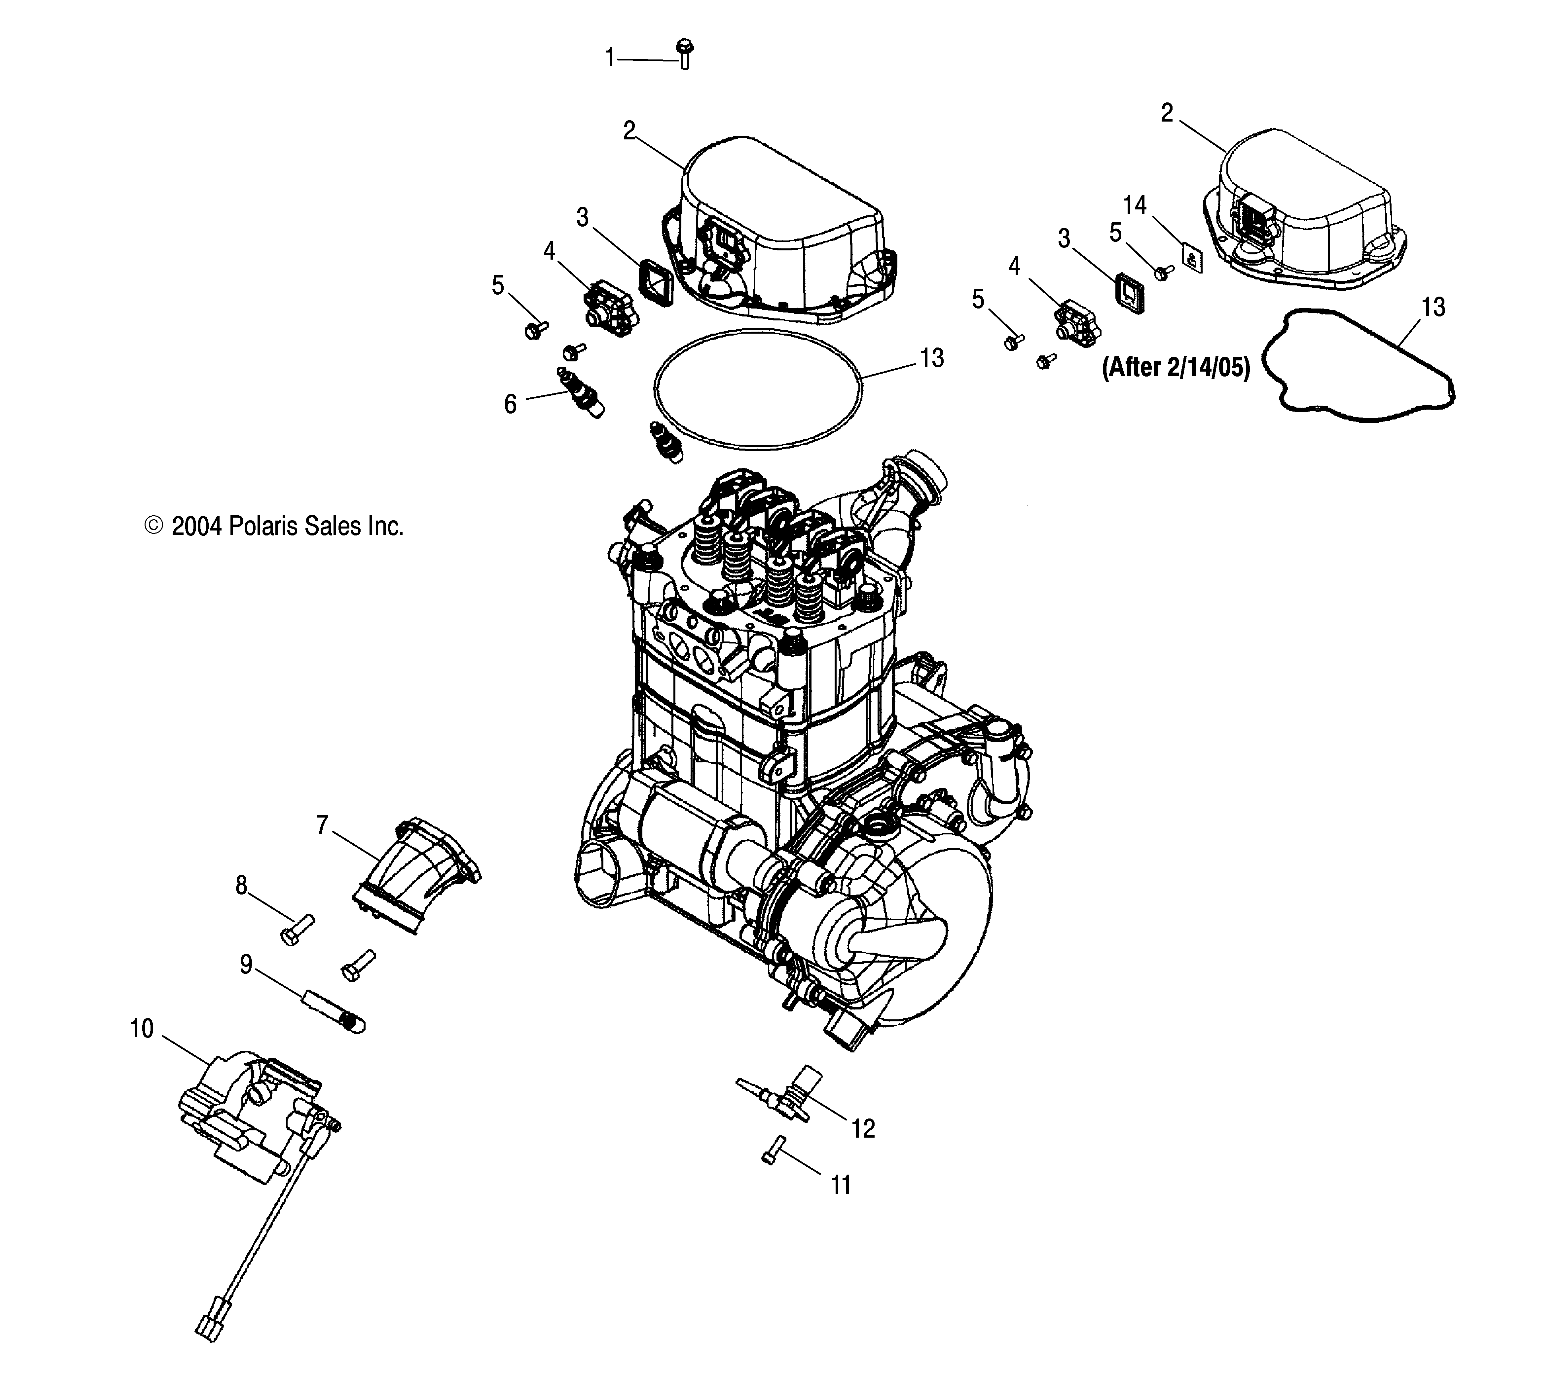 Part Number : 1202836 THROTTLE BODY ASM